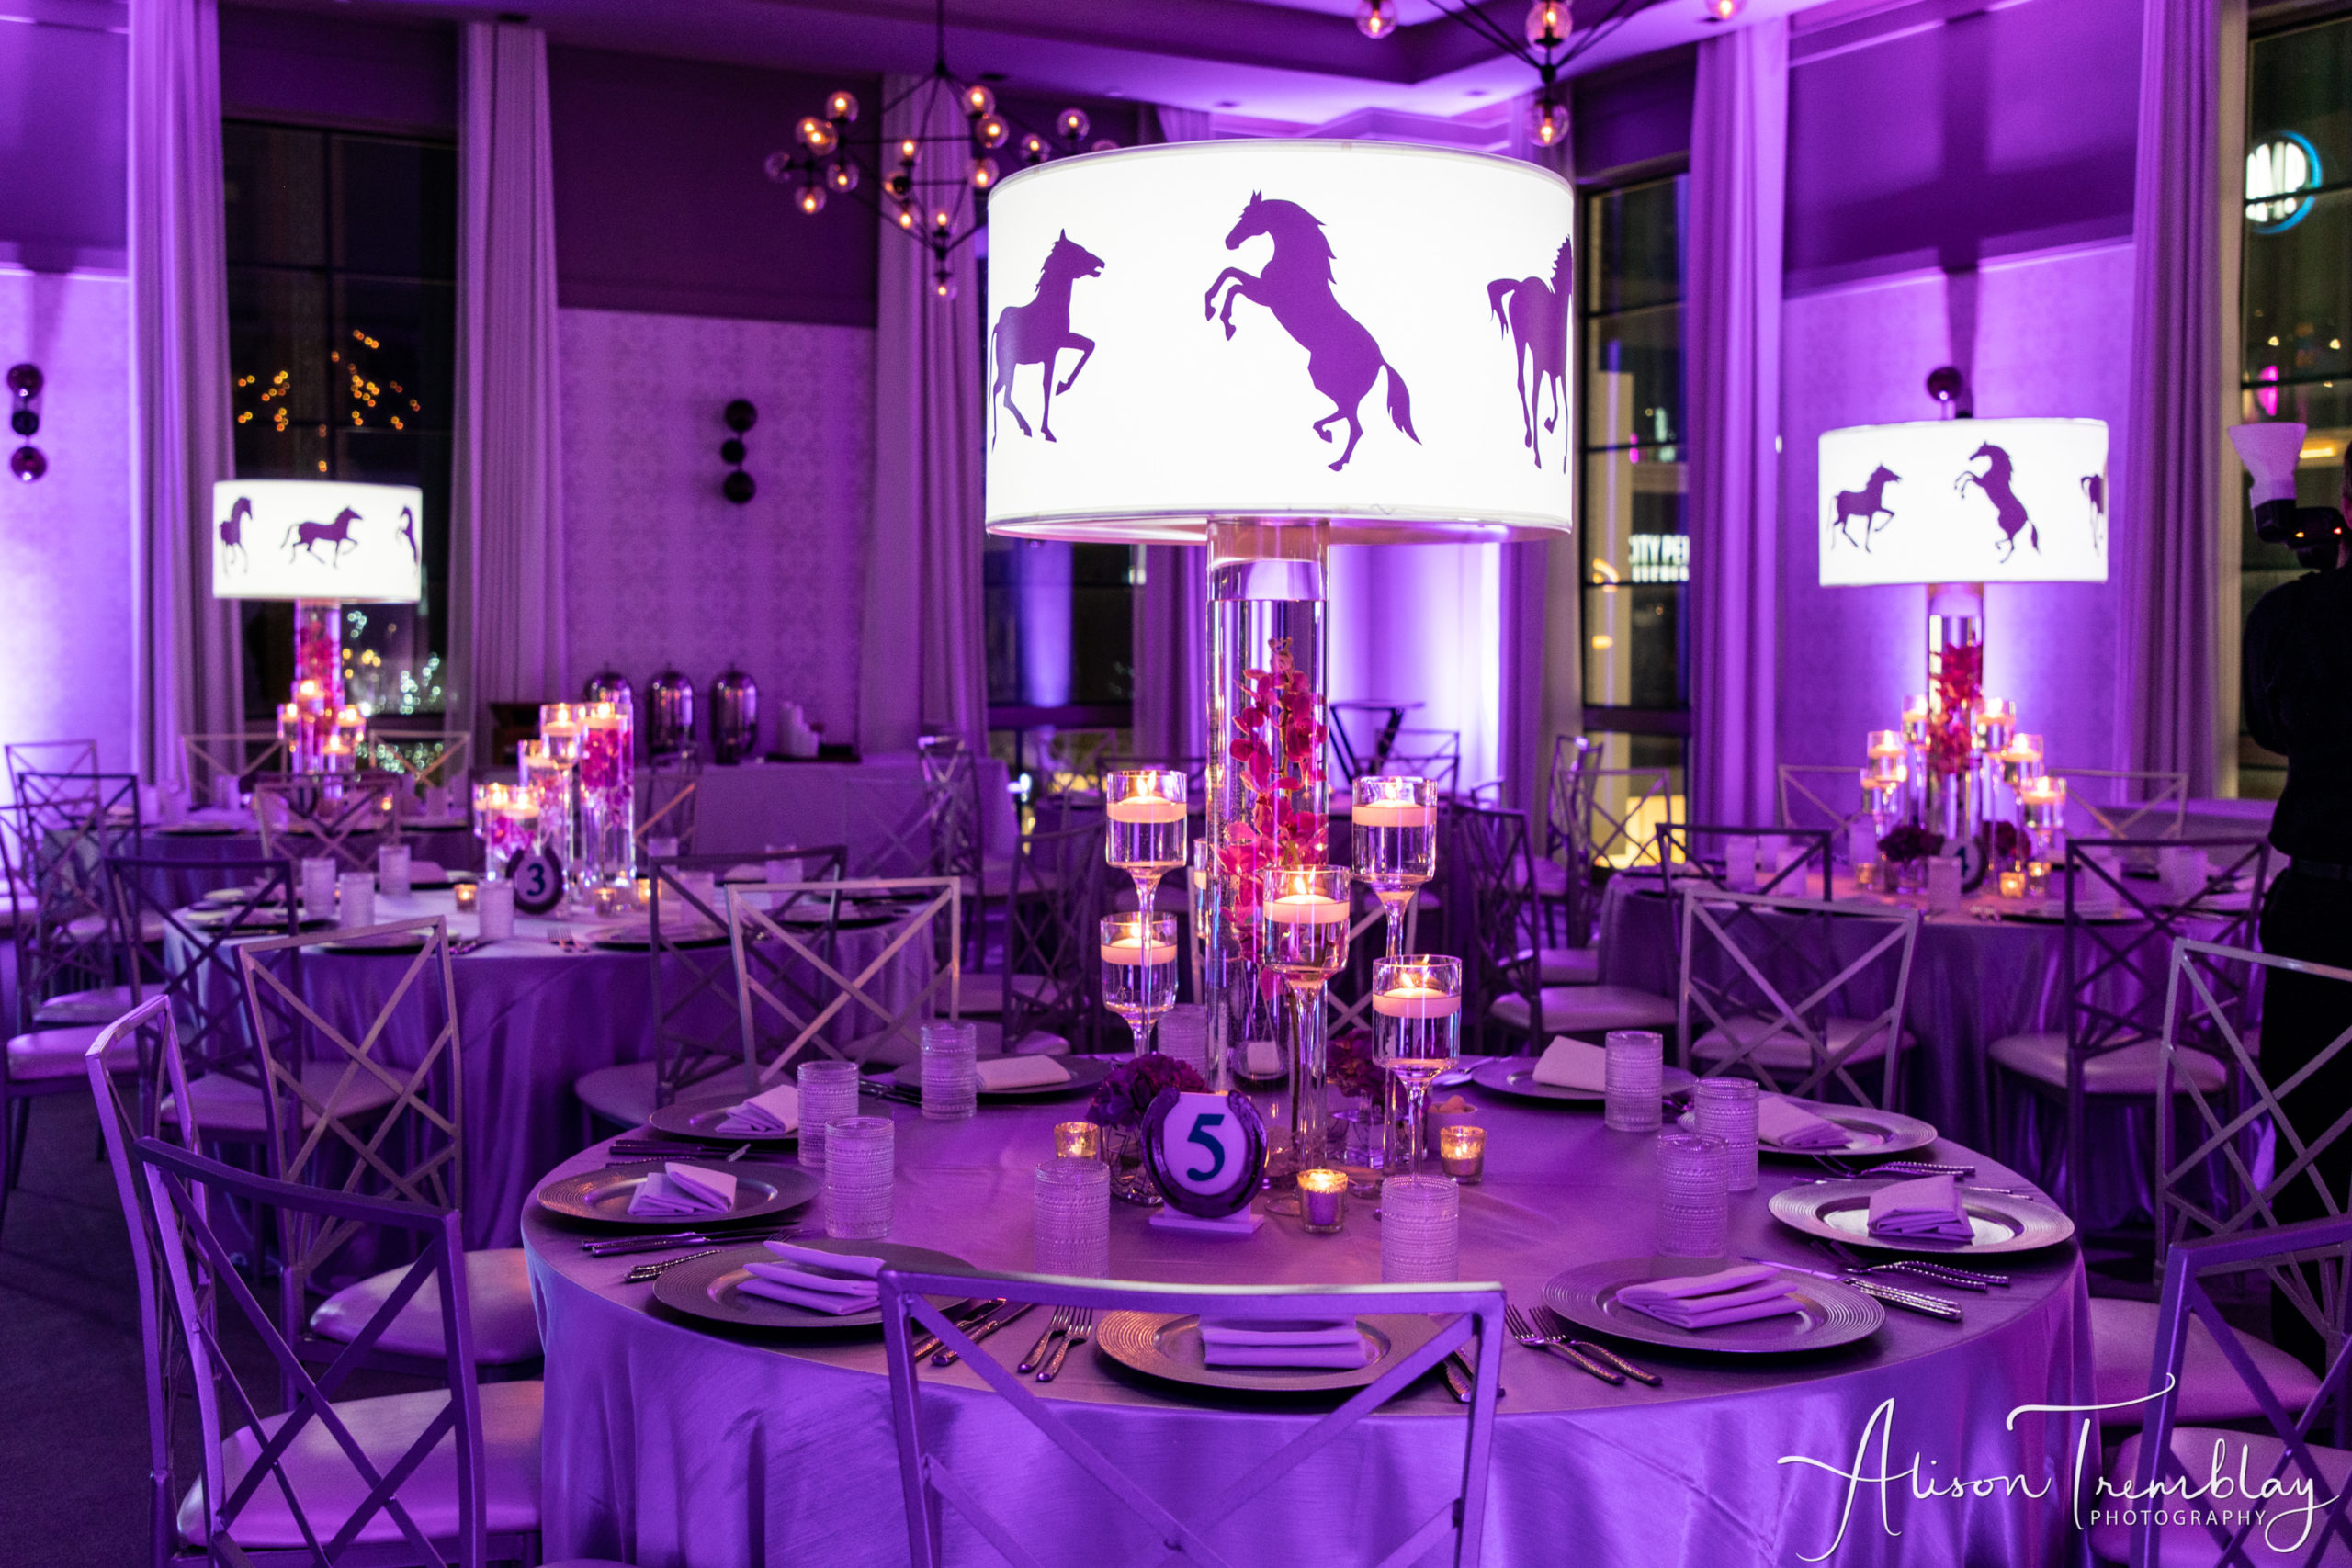 Lampshade centerpieces and horse shoe table numbers at Zoe's Purple and Teal Equestrian Bat Mitzvah at Canopy by Hilton Washington DC Bethesda North | Pop Color Events | Adding a Pop of Color to Bar & Bat Mitzvahs in DC, MD & VA | Photo by: Alison Tremblay Photography